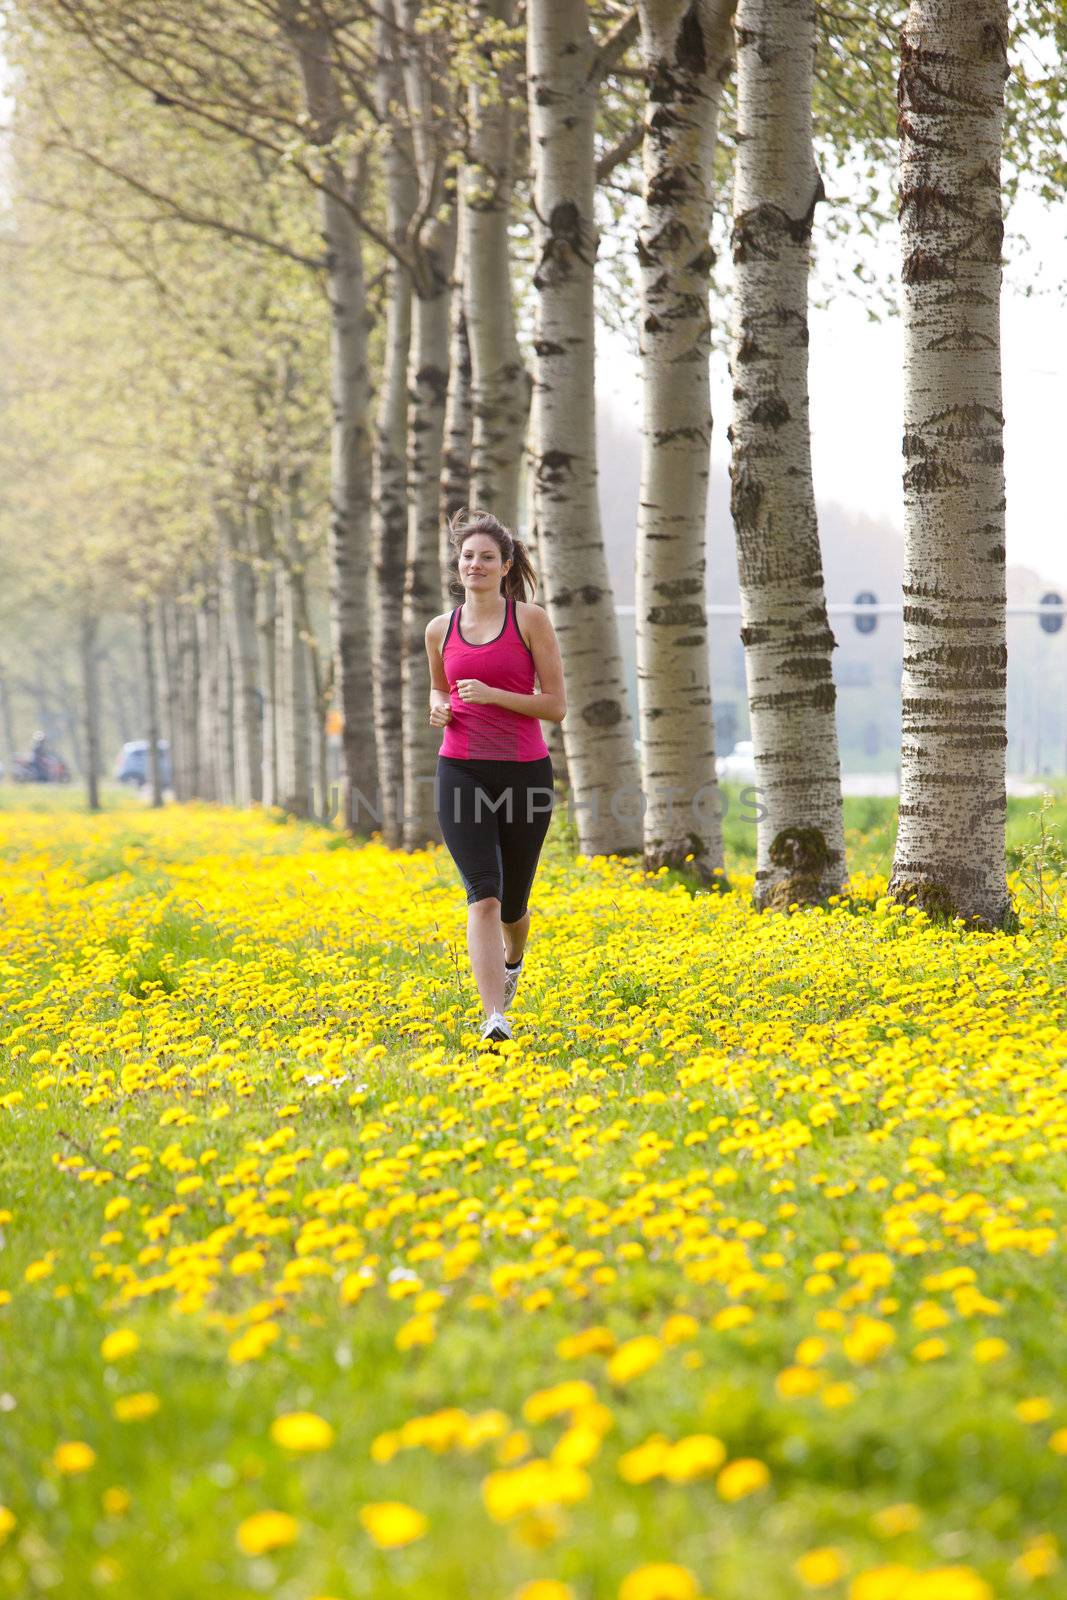 Beautiful young girl running in a field of dandelions